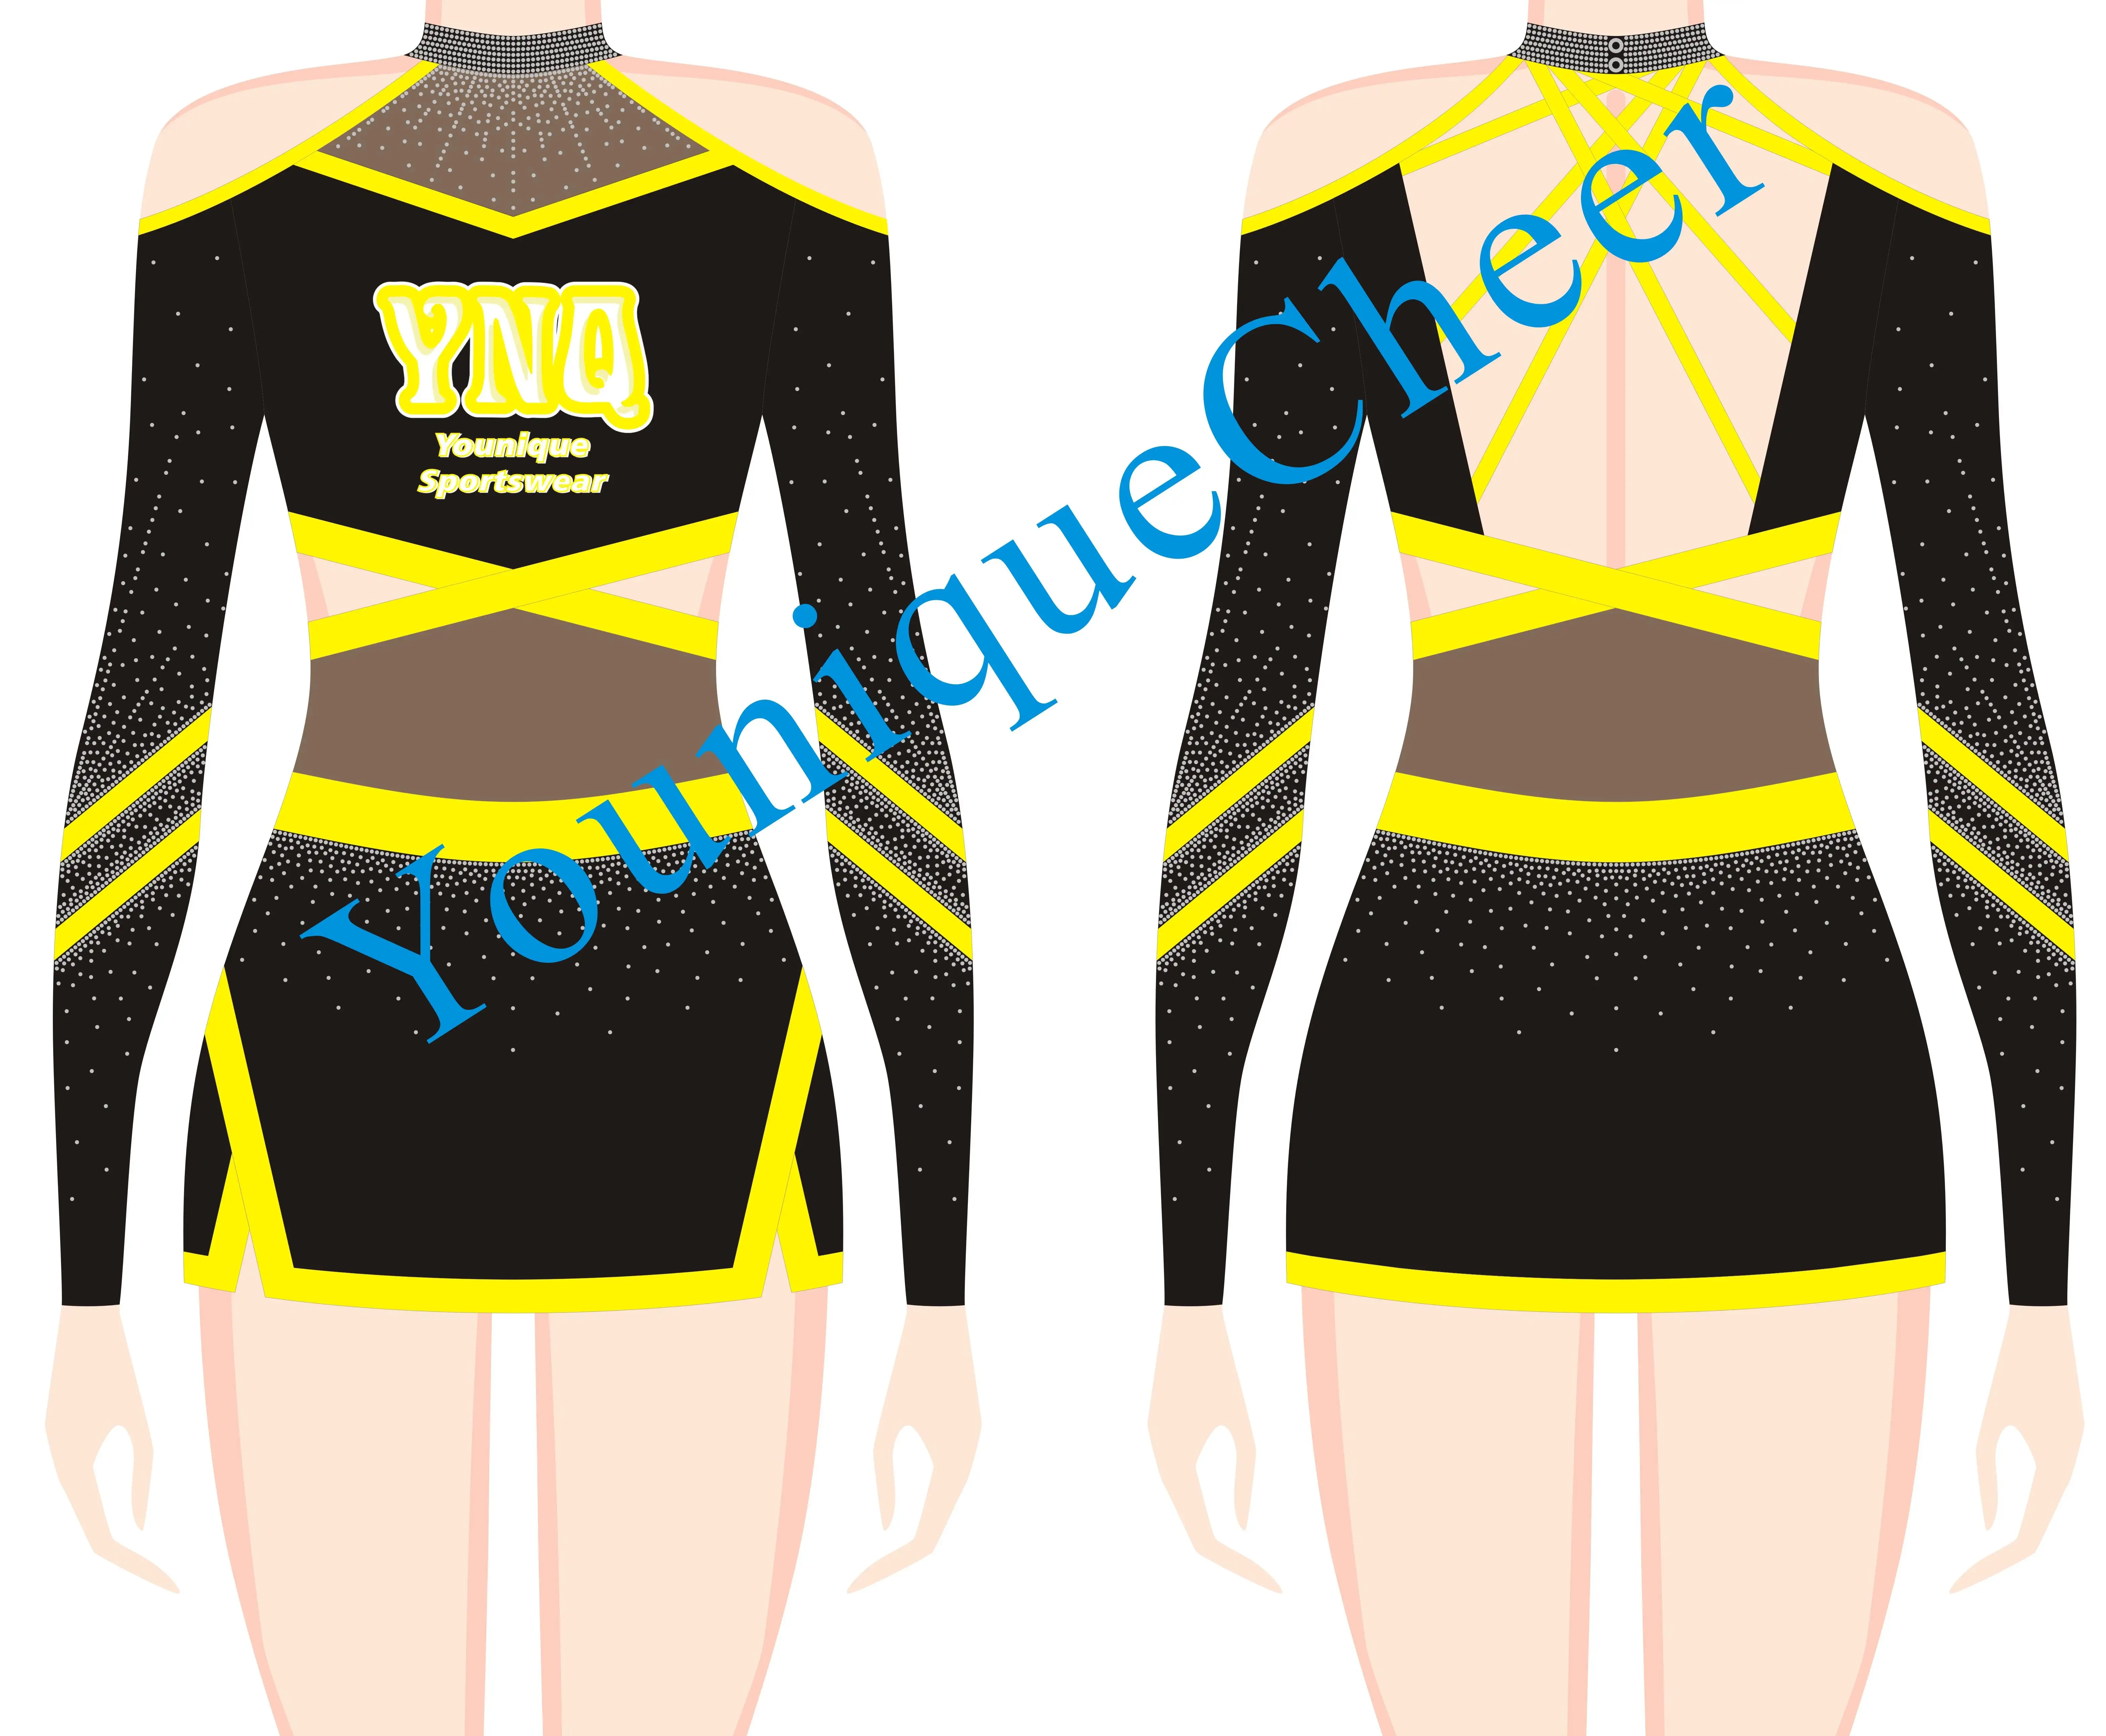 Best Quality Crop Top and Dress Fashion Design Performance Wear Competitive Shiny Cheerleader Uniforms Blue Mini Shirt